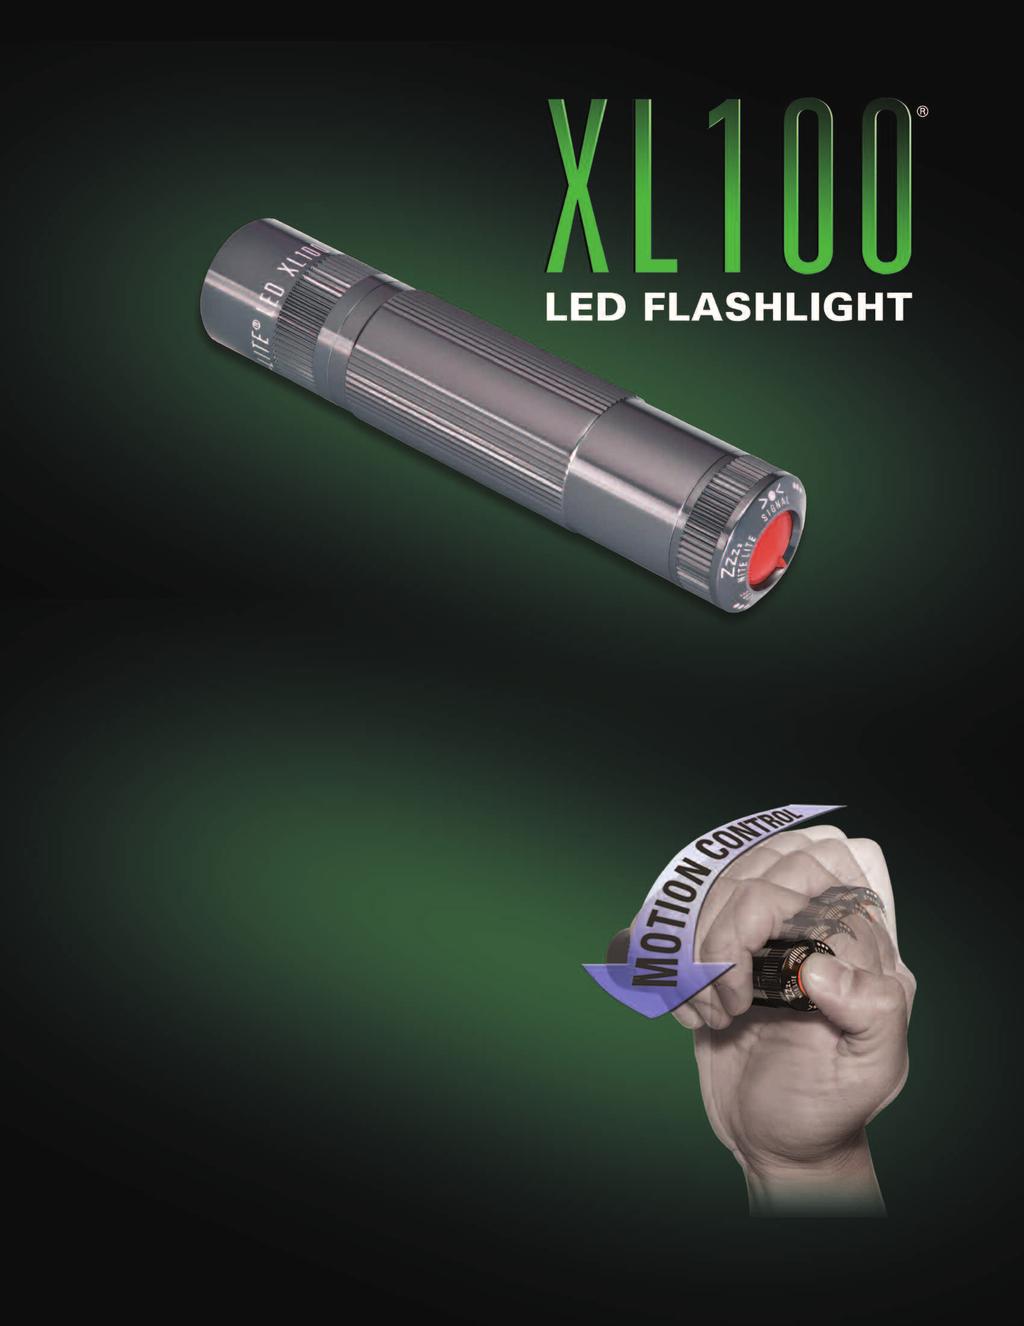 Engineered from the ground up, this advanced lighting instrument is driven by the next generation of MAG-LED technology and includes the Advanced Flashlight User Interface.